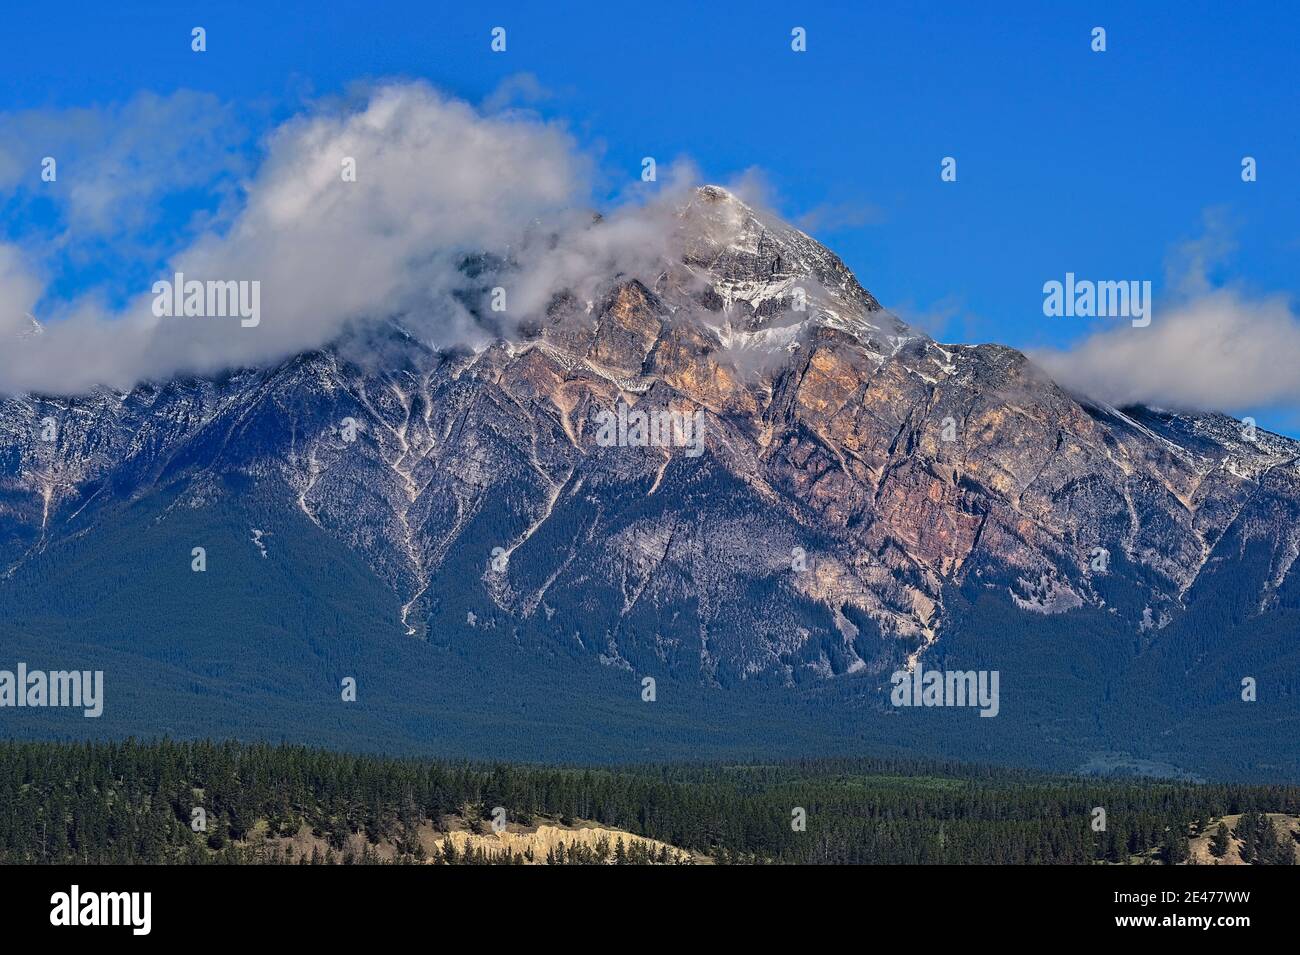 A landscape image of the famous Pyramid mountain located in Jasper National Park on a blue summer's day. Stock Photo